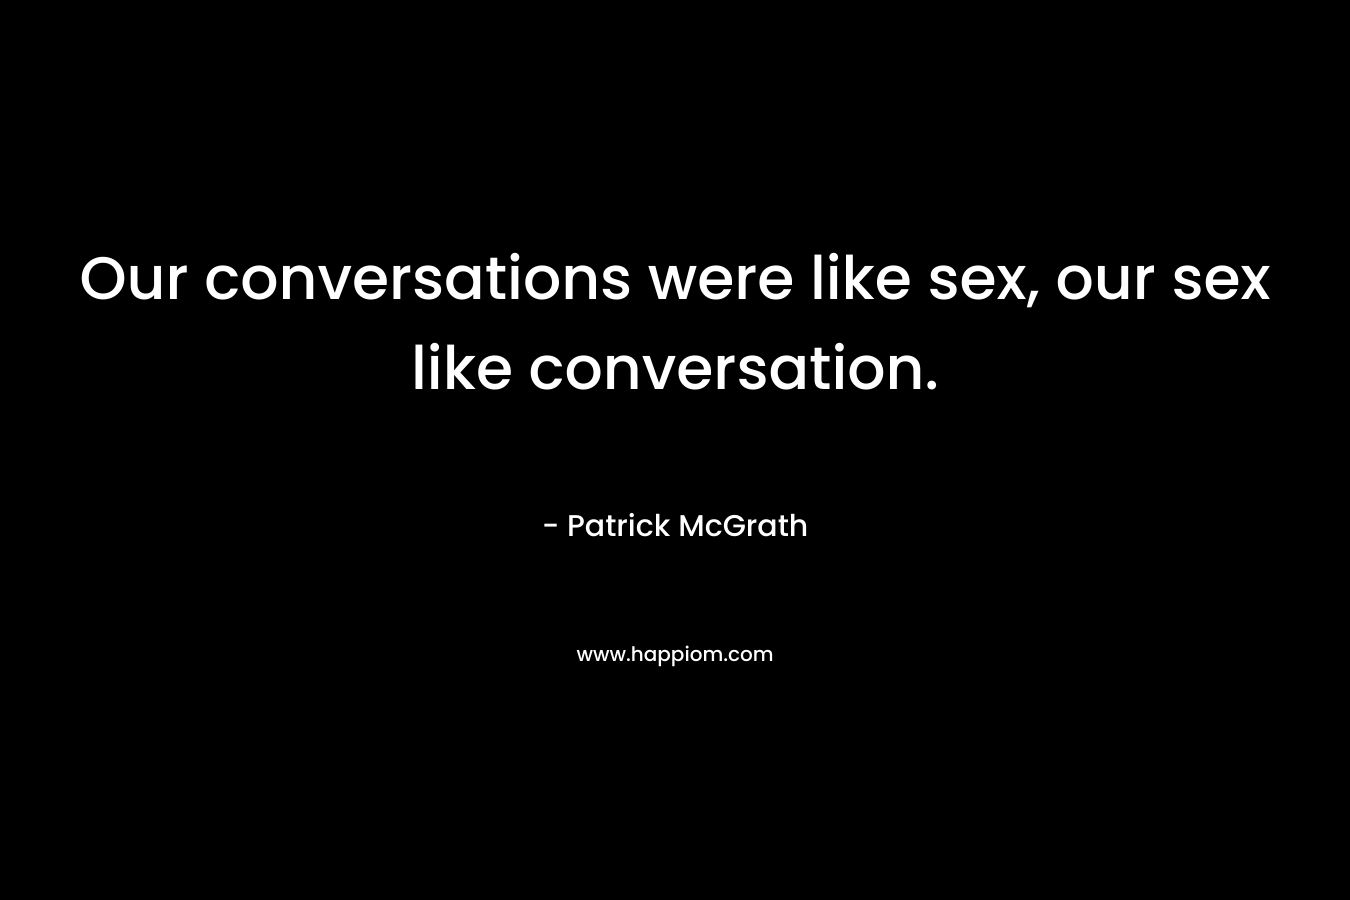 Our conversations were like sex, our sex like conversation.